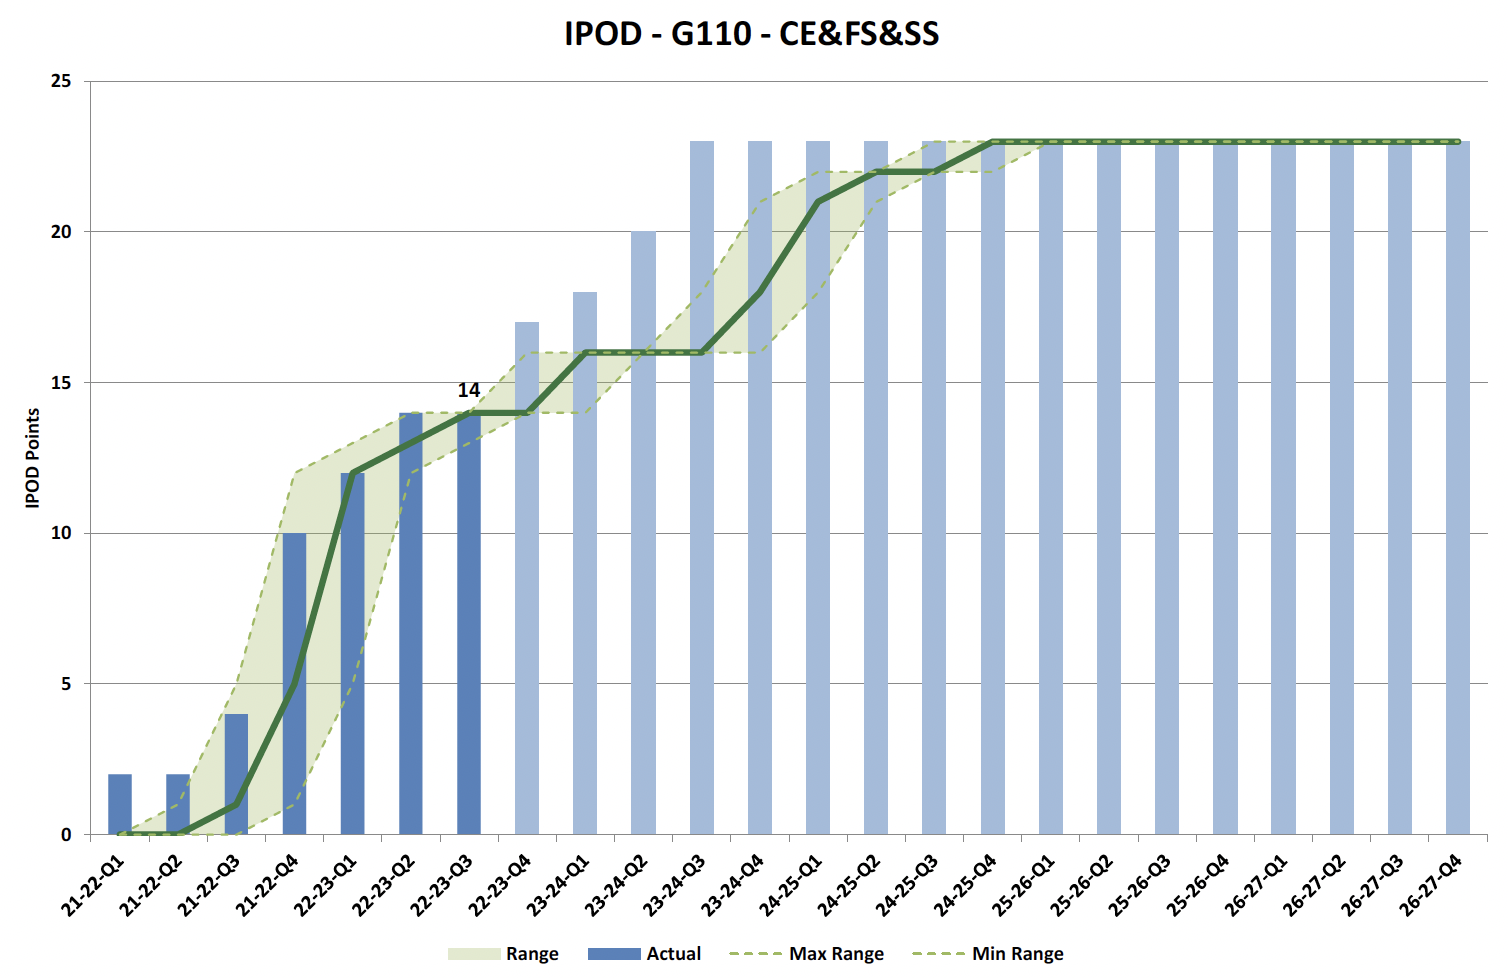 p. Figure 16 Chart showing IPOD points achieved or forecast for Financial Completion milestone against target range for all projects in CE&FS&SS Portfolio